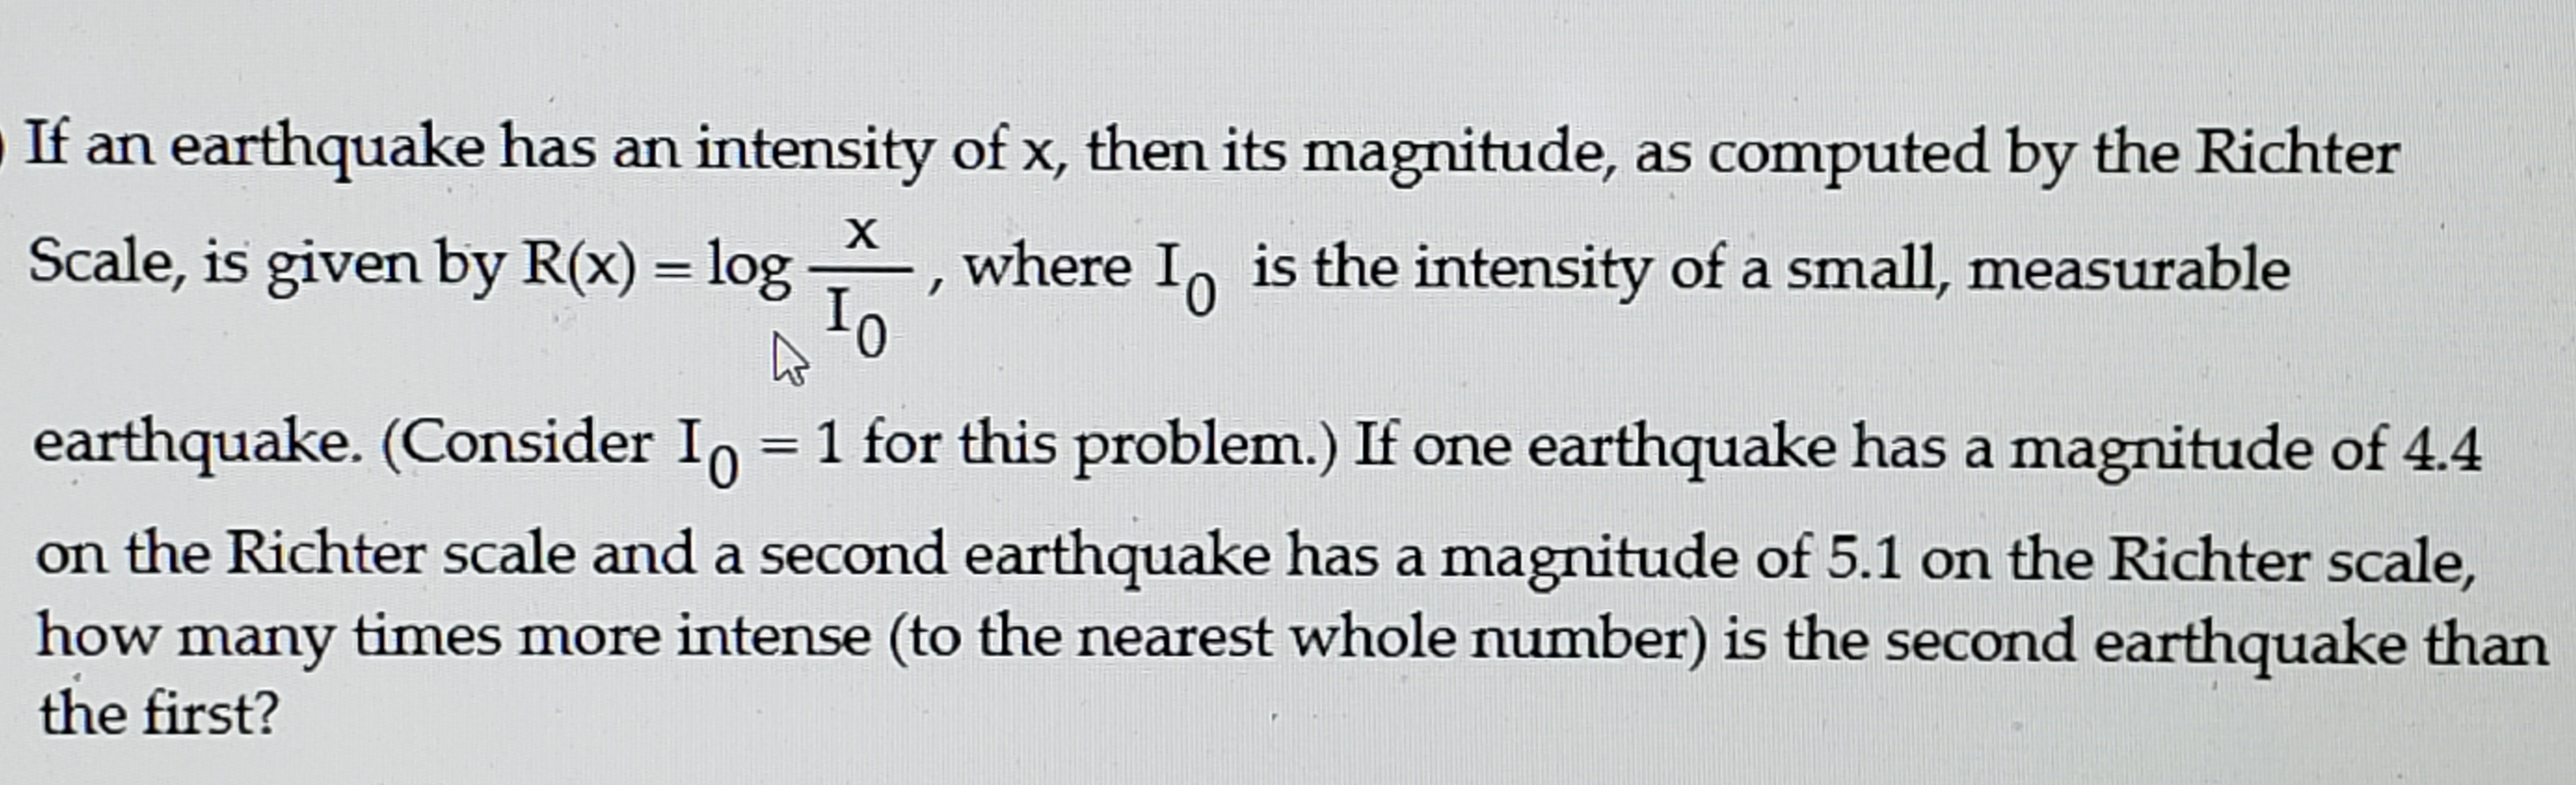 If an earthquake has an intensity of x, then its magnitude, as computed by the Richter
х
Scale, is given by R(x) = log
where I, is the intensity of a small, measurable
earthquake. (Consider In = 1 for this problem.) If one earthquake has a magnitude of 4.4
on the Richter scale and a second earthquake has a magnitude of 5.1 on the Richter scale,
how many times more intense (to the nearest whole number) is the second earthquake than
the first?
